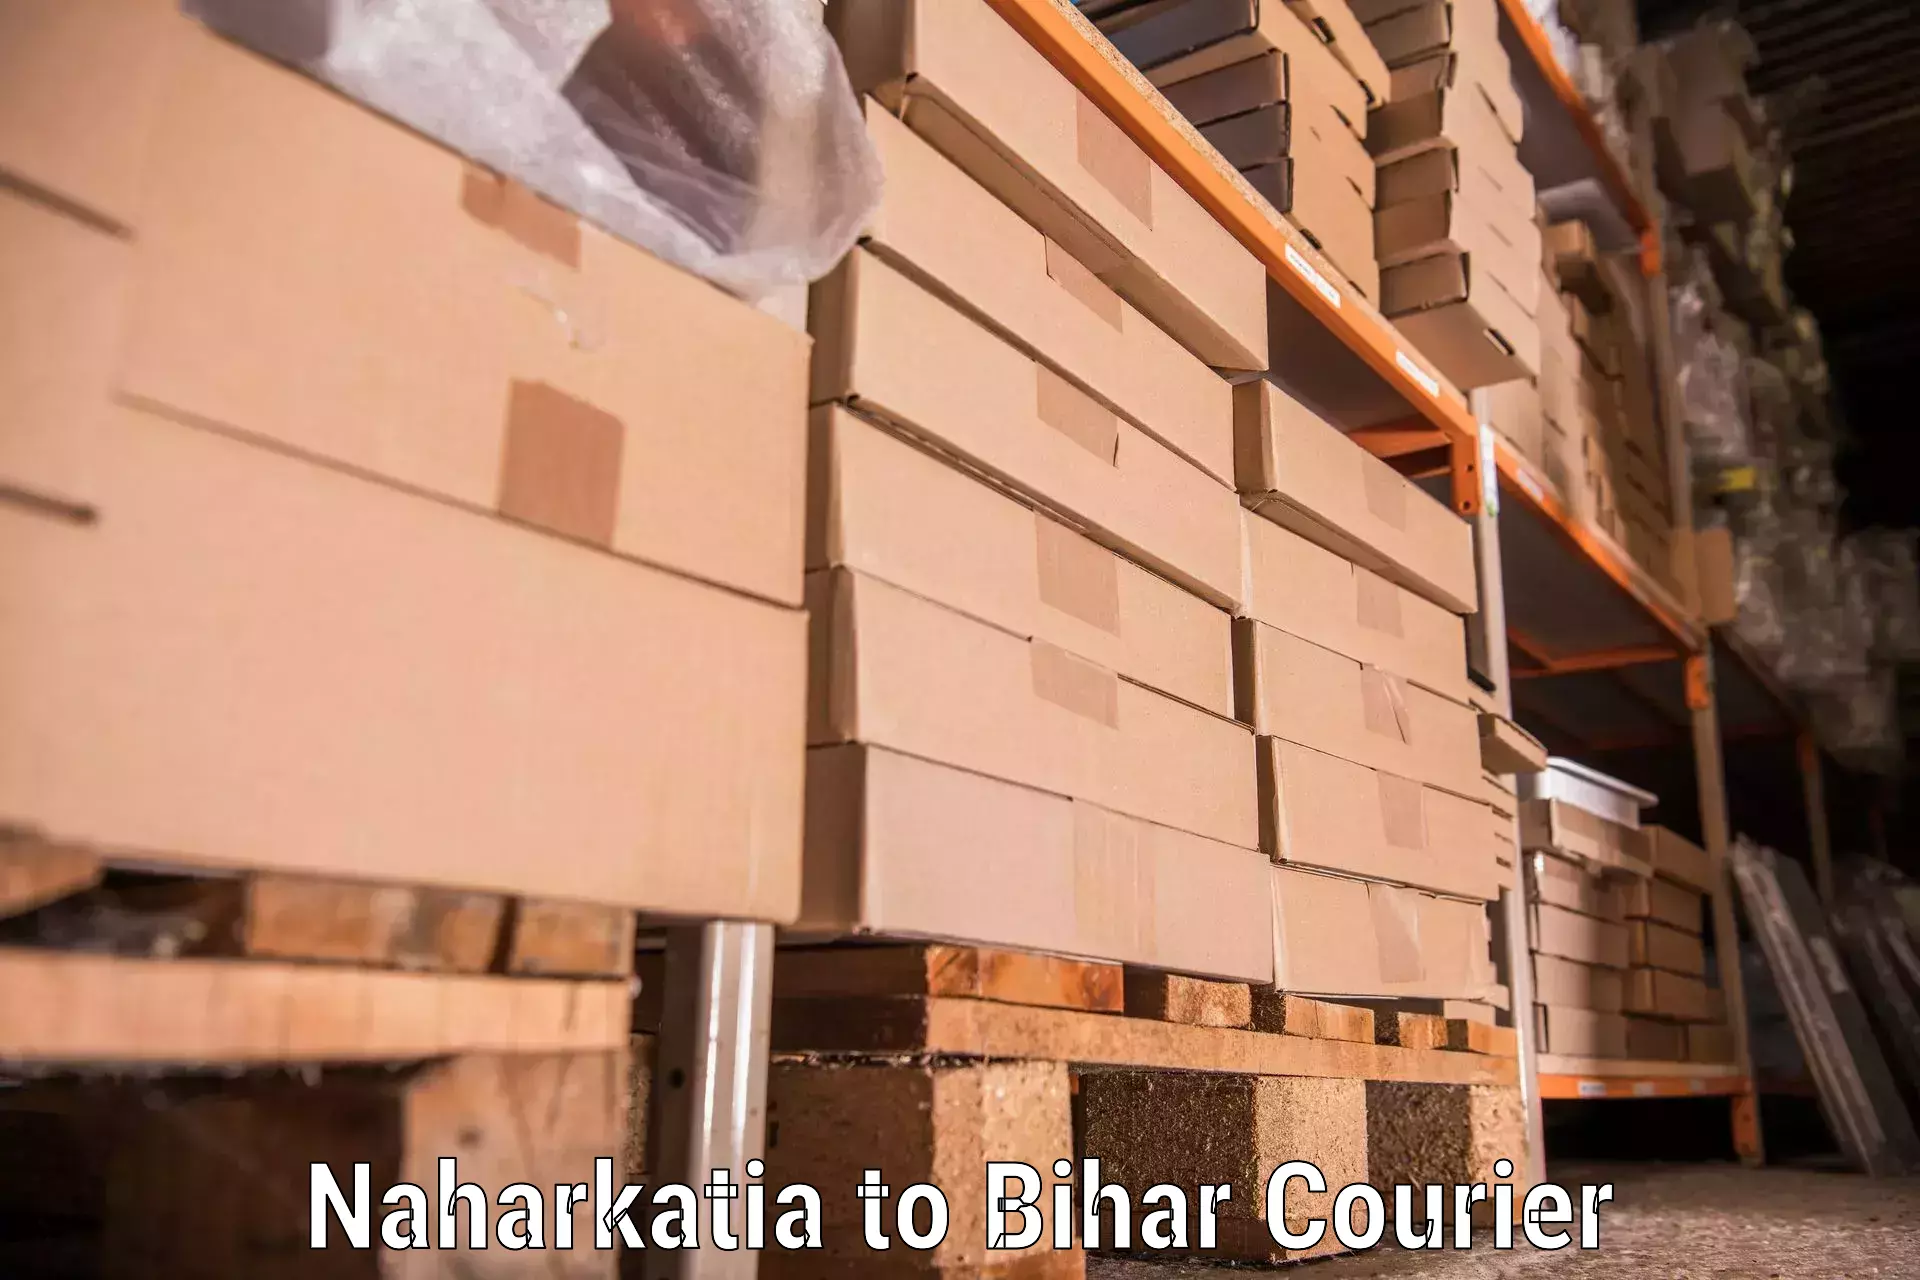 Professional packing and transport in Naharkatia to Dhaka